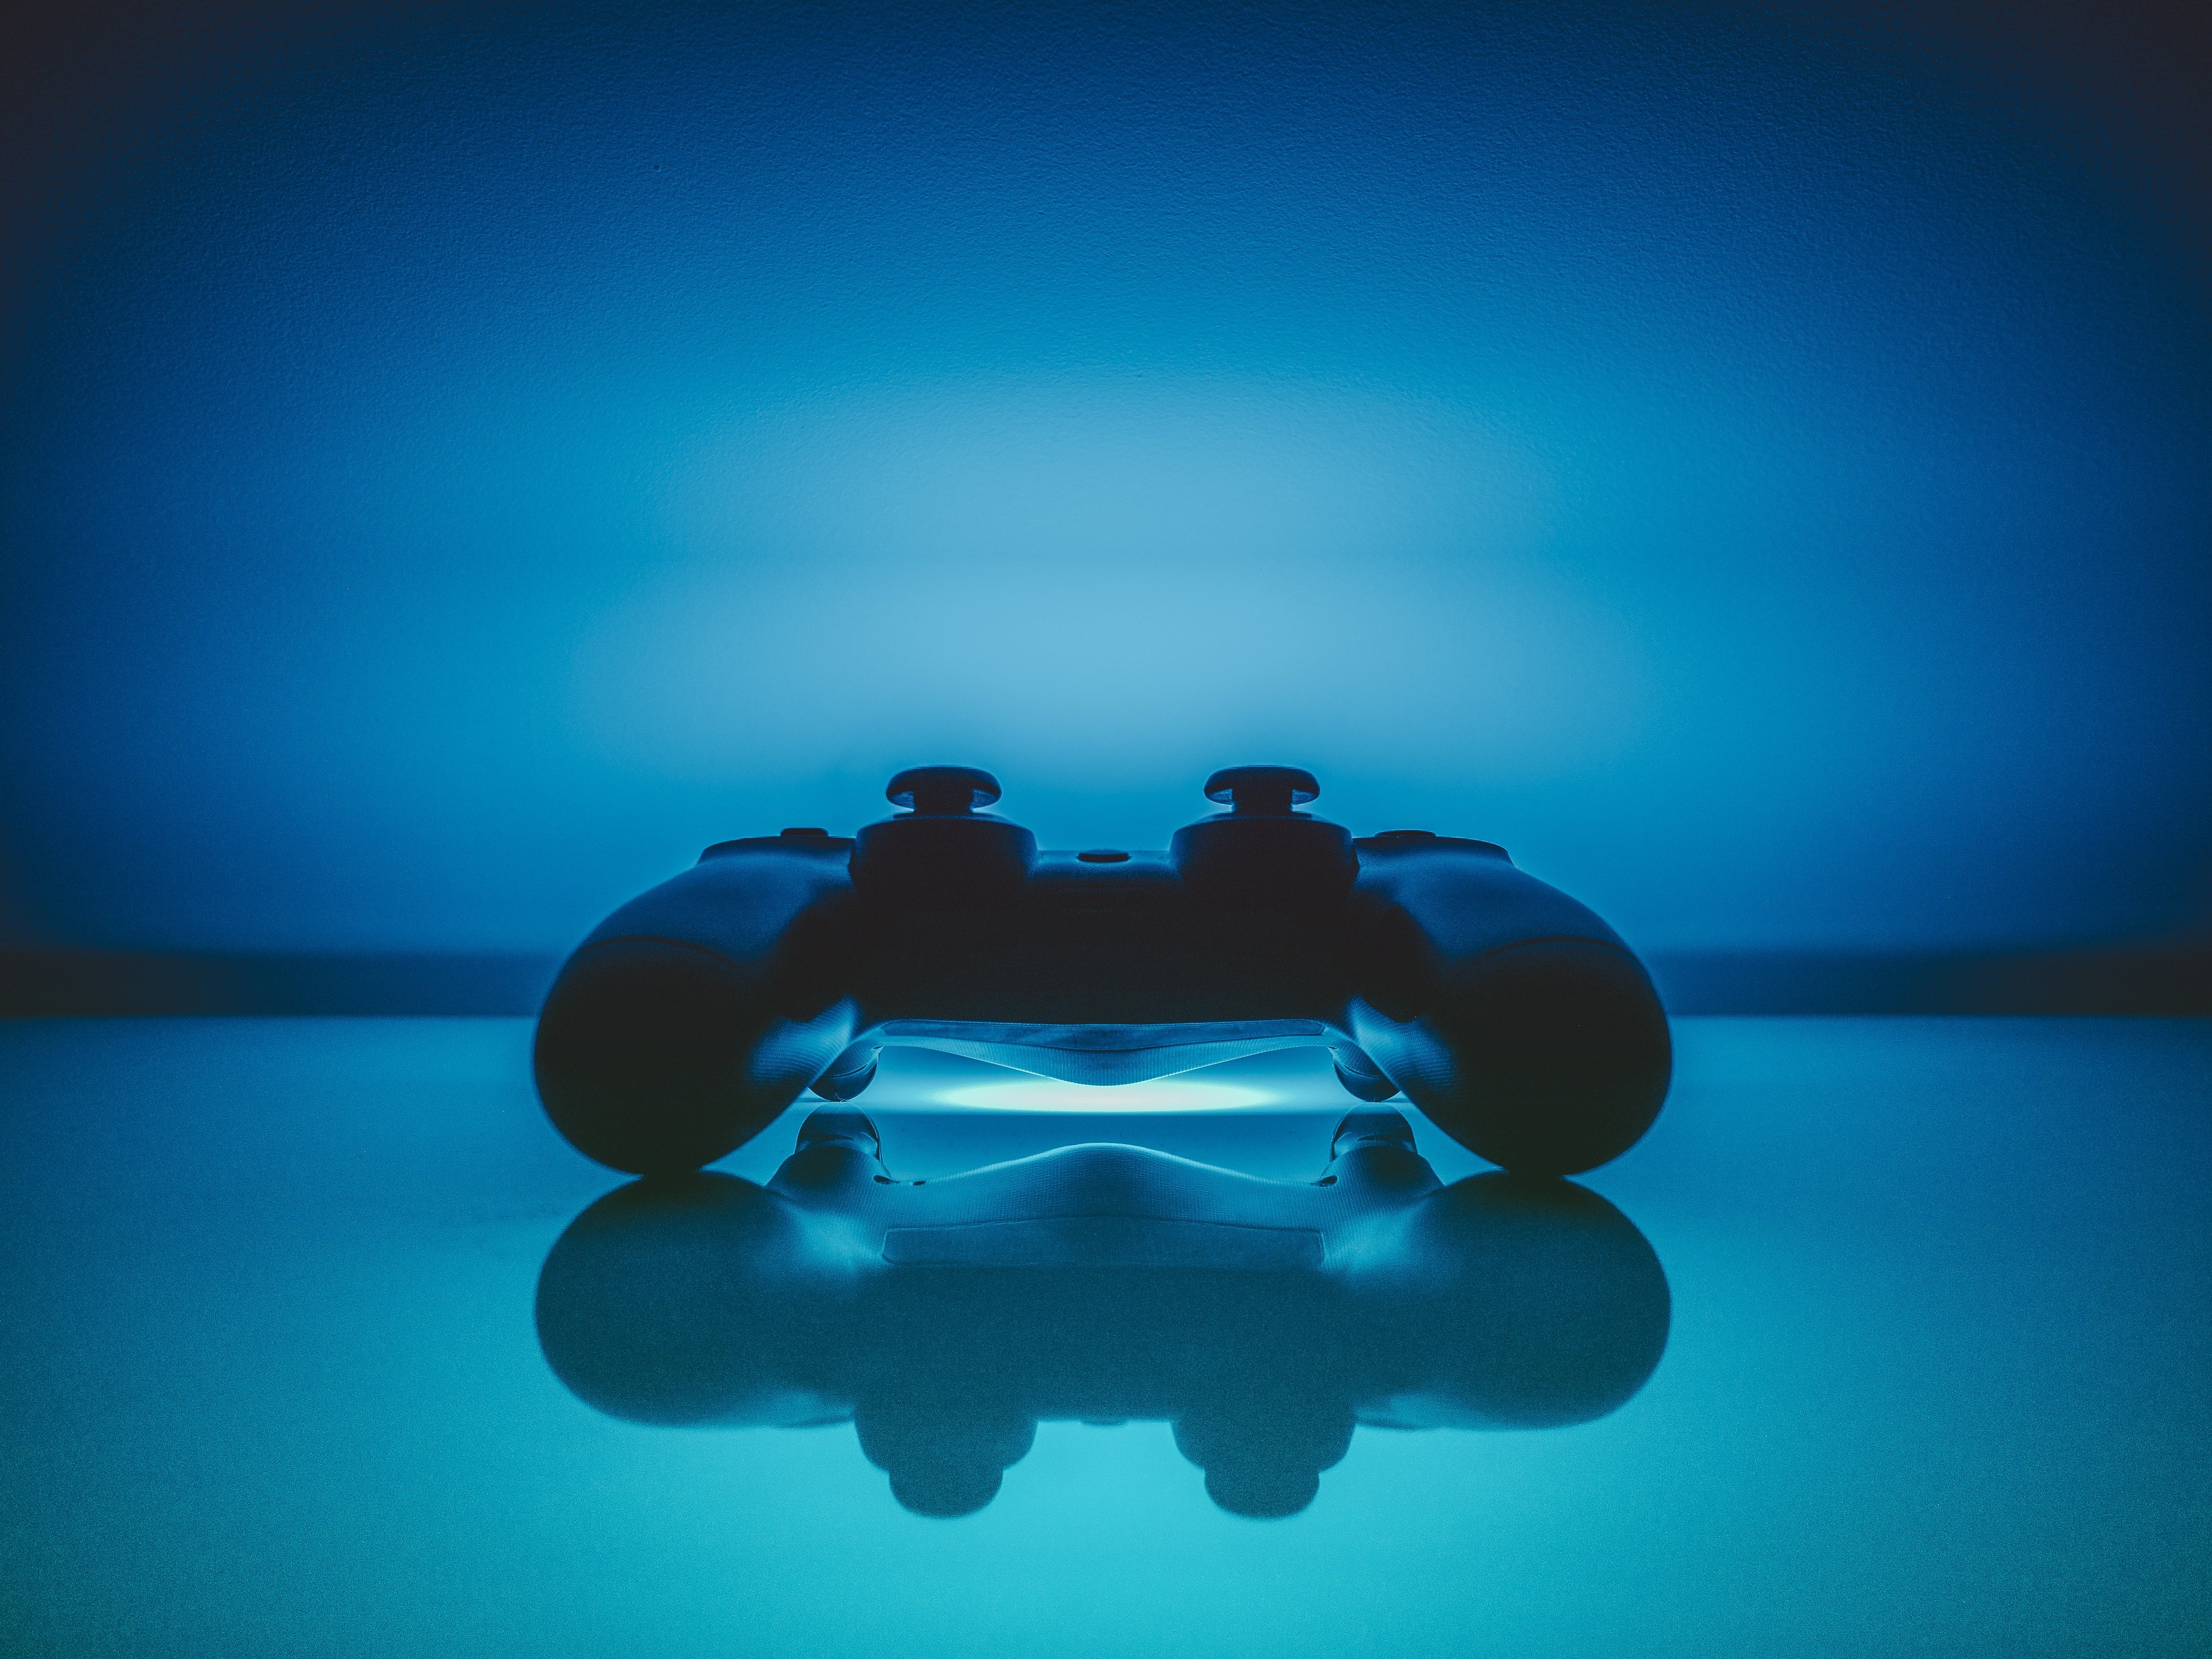 Artificial intelligence in China’s video games: opportunities for international businesses? | Daxue Consulting